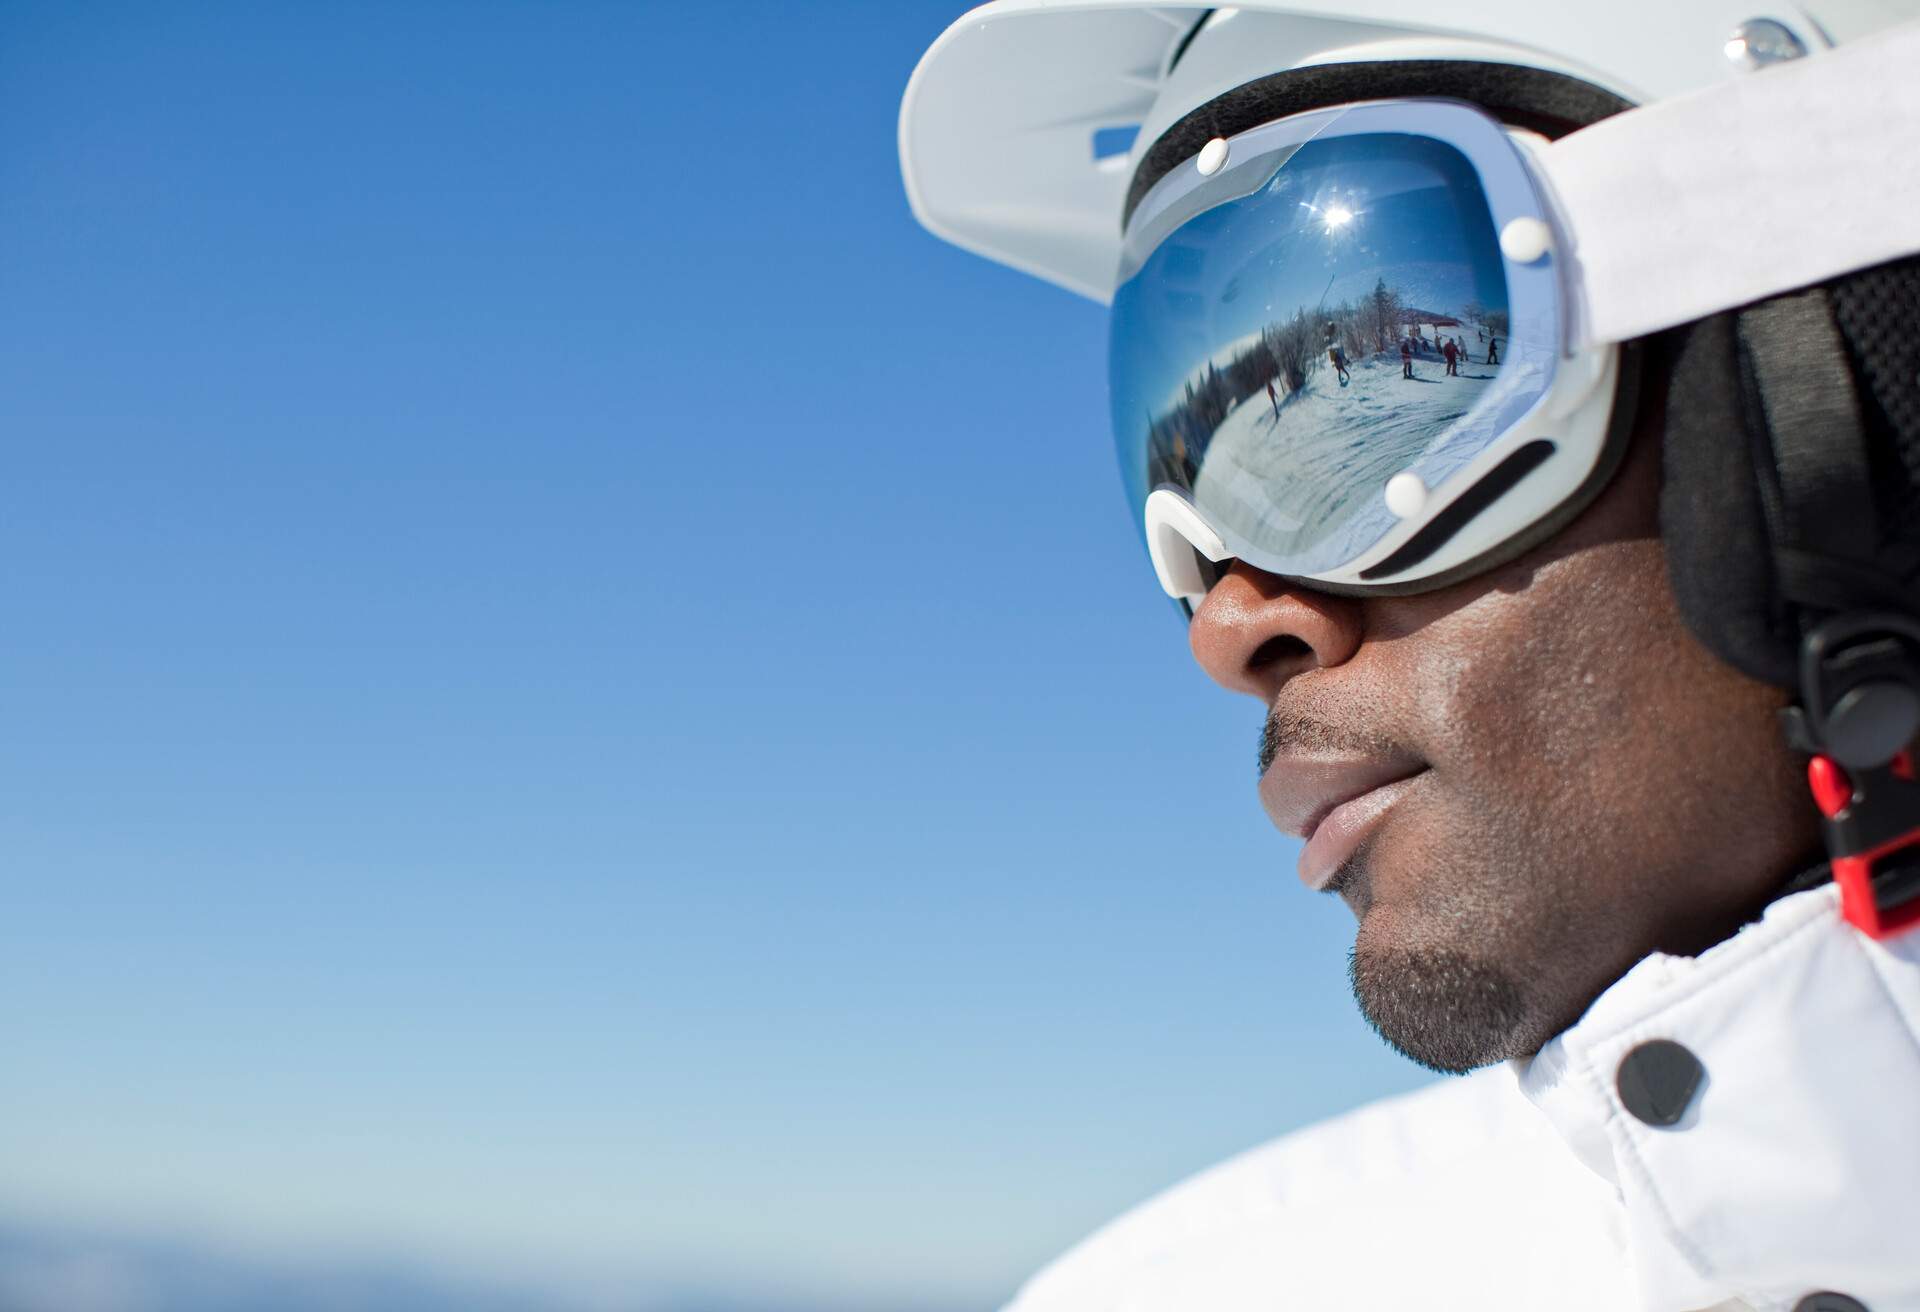 A man in white ski gear with ski landscape reflected on the lens of his goggles.